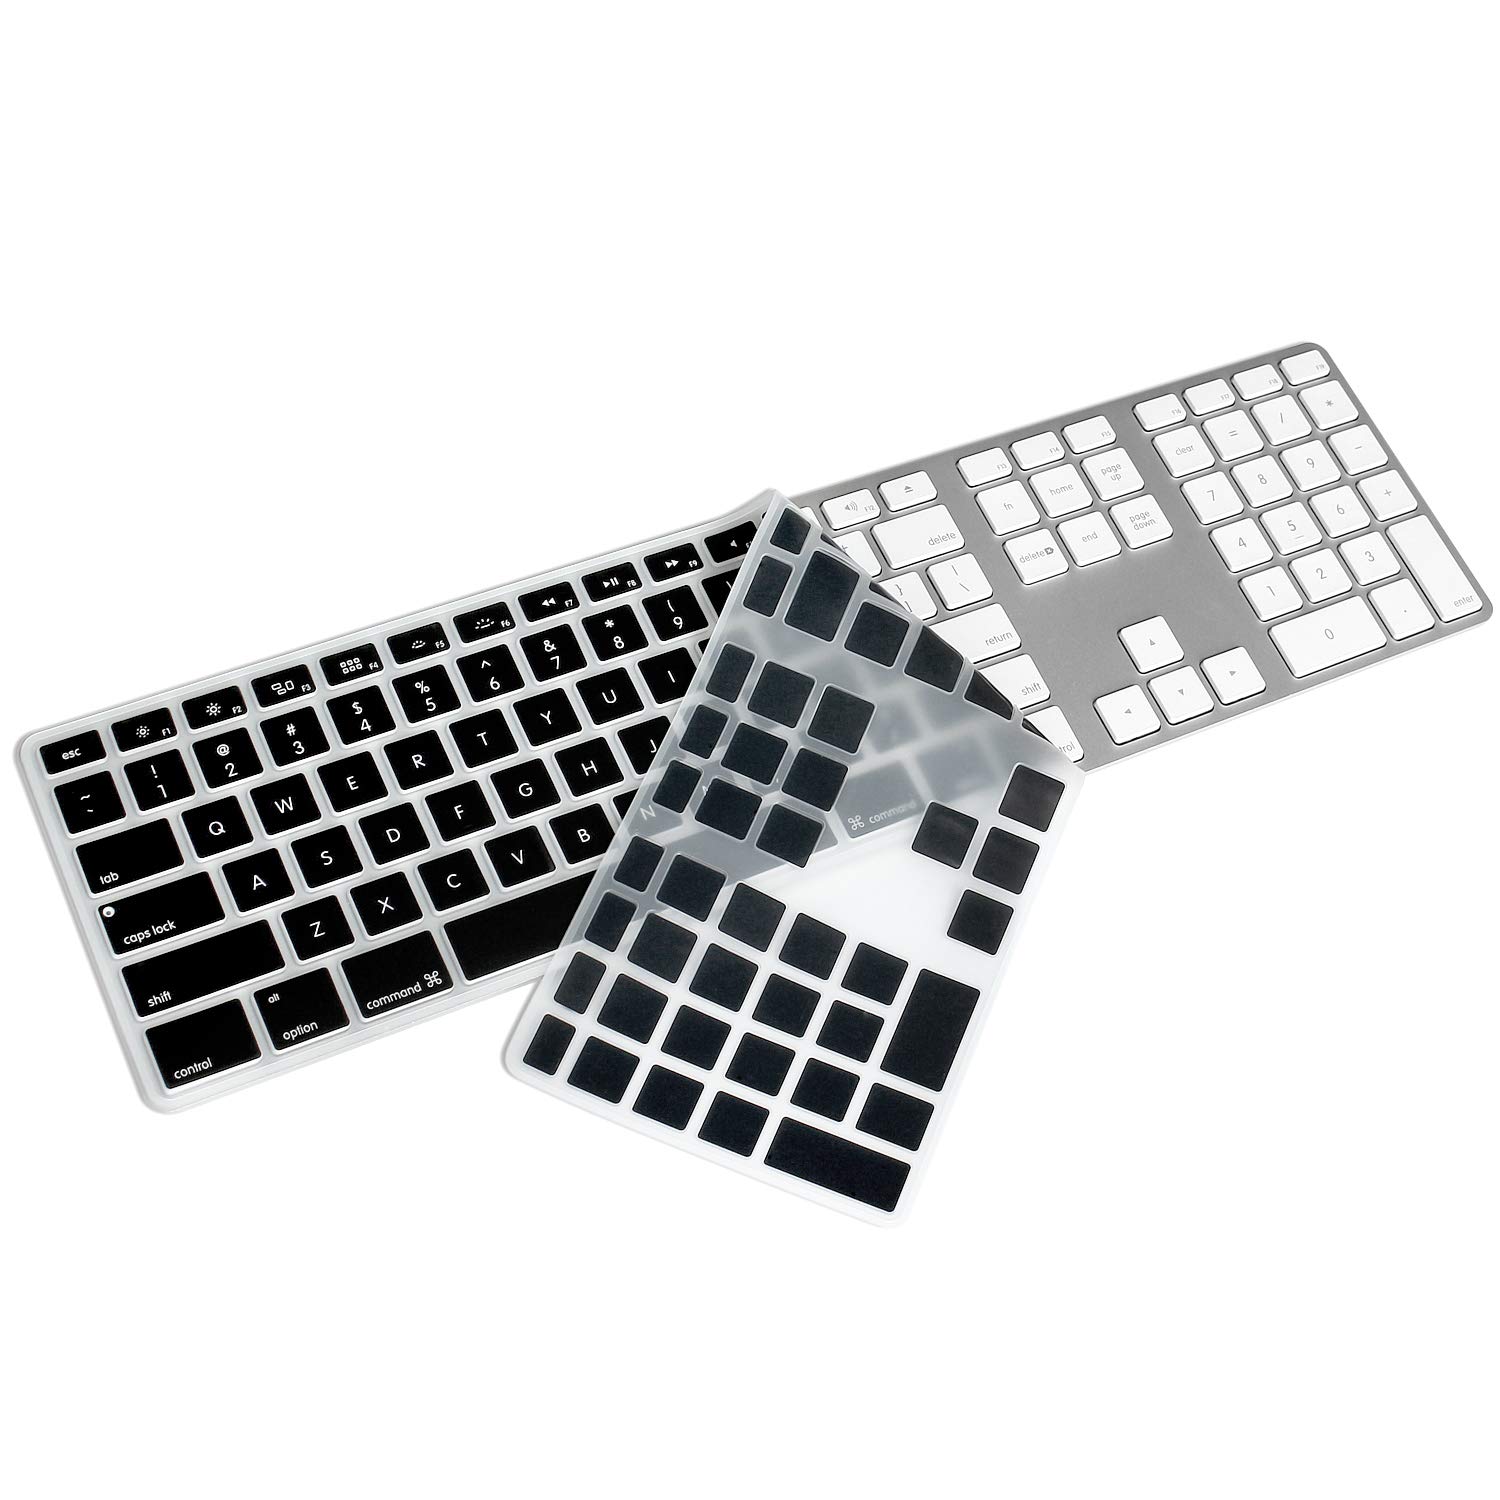 Apple keyboard with non-functioning letters.